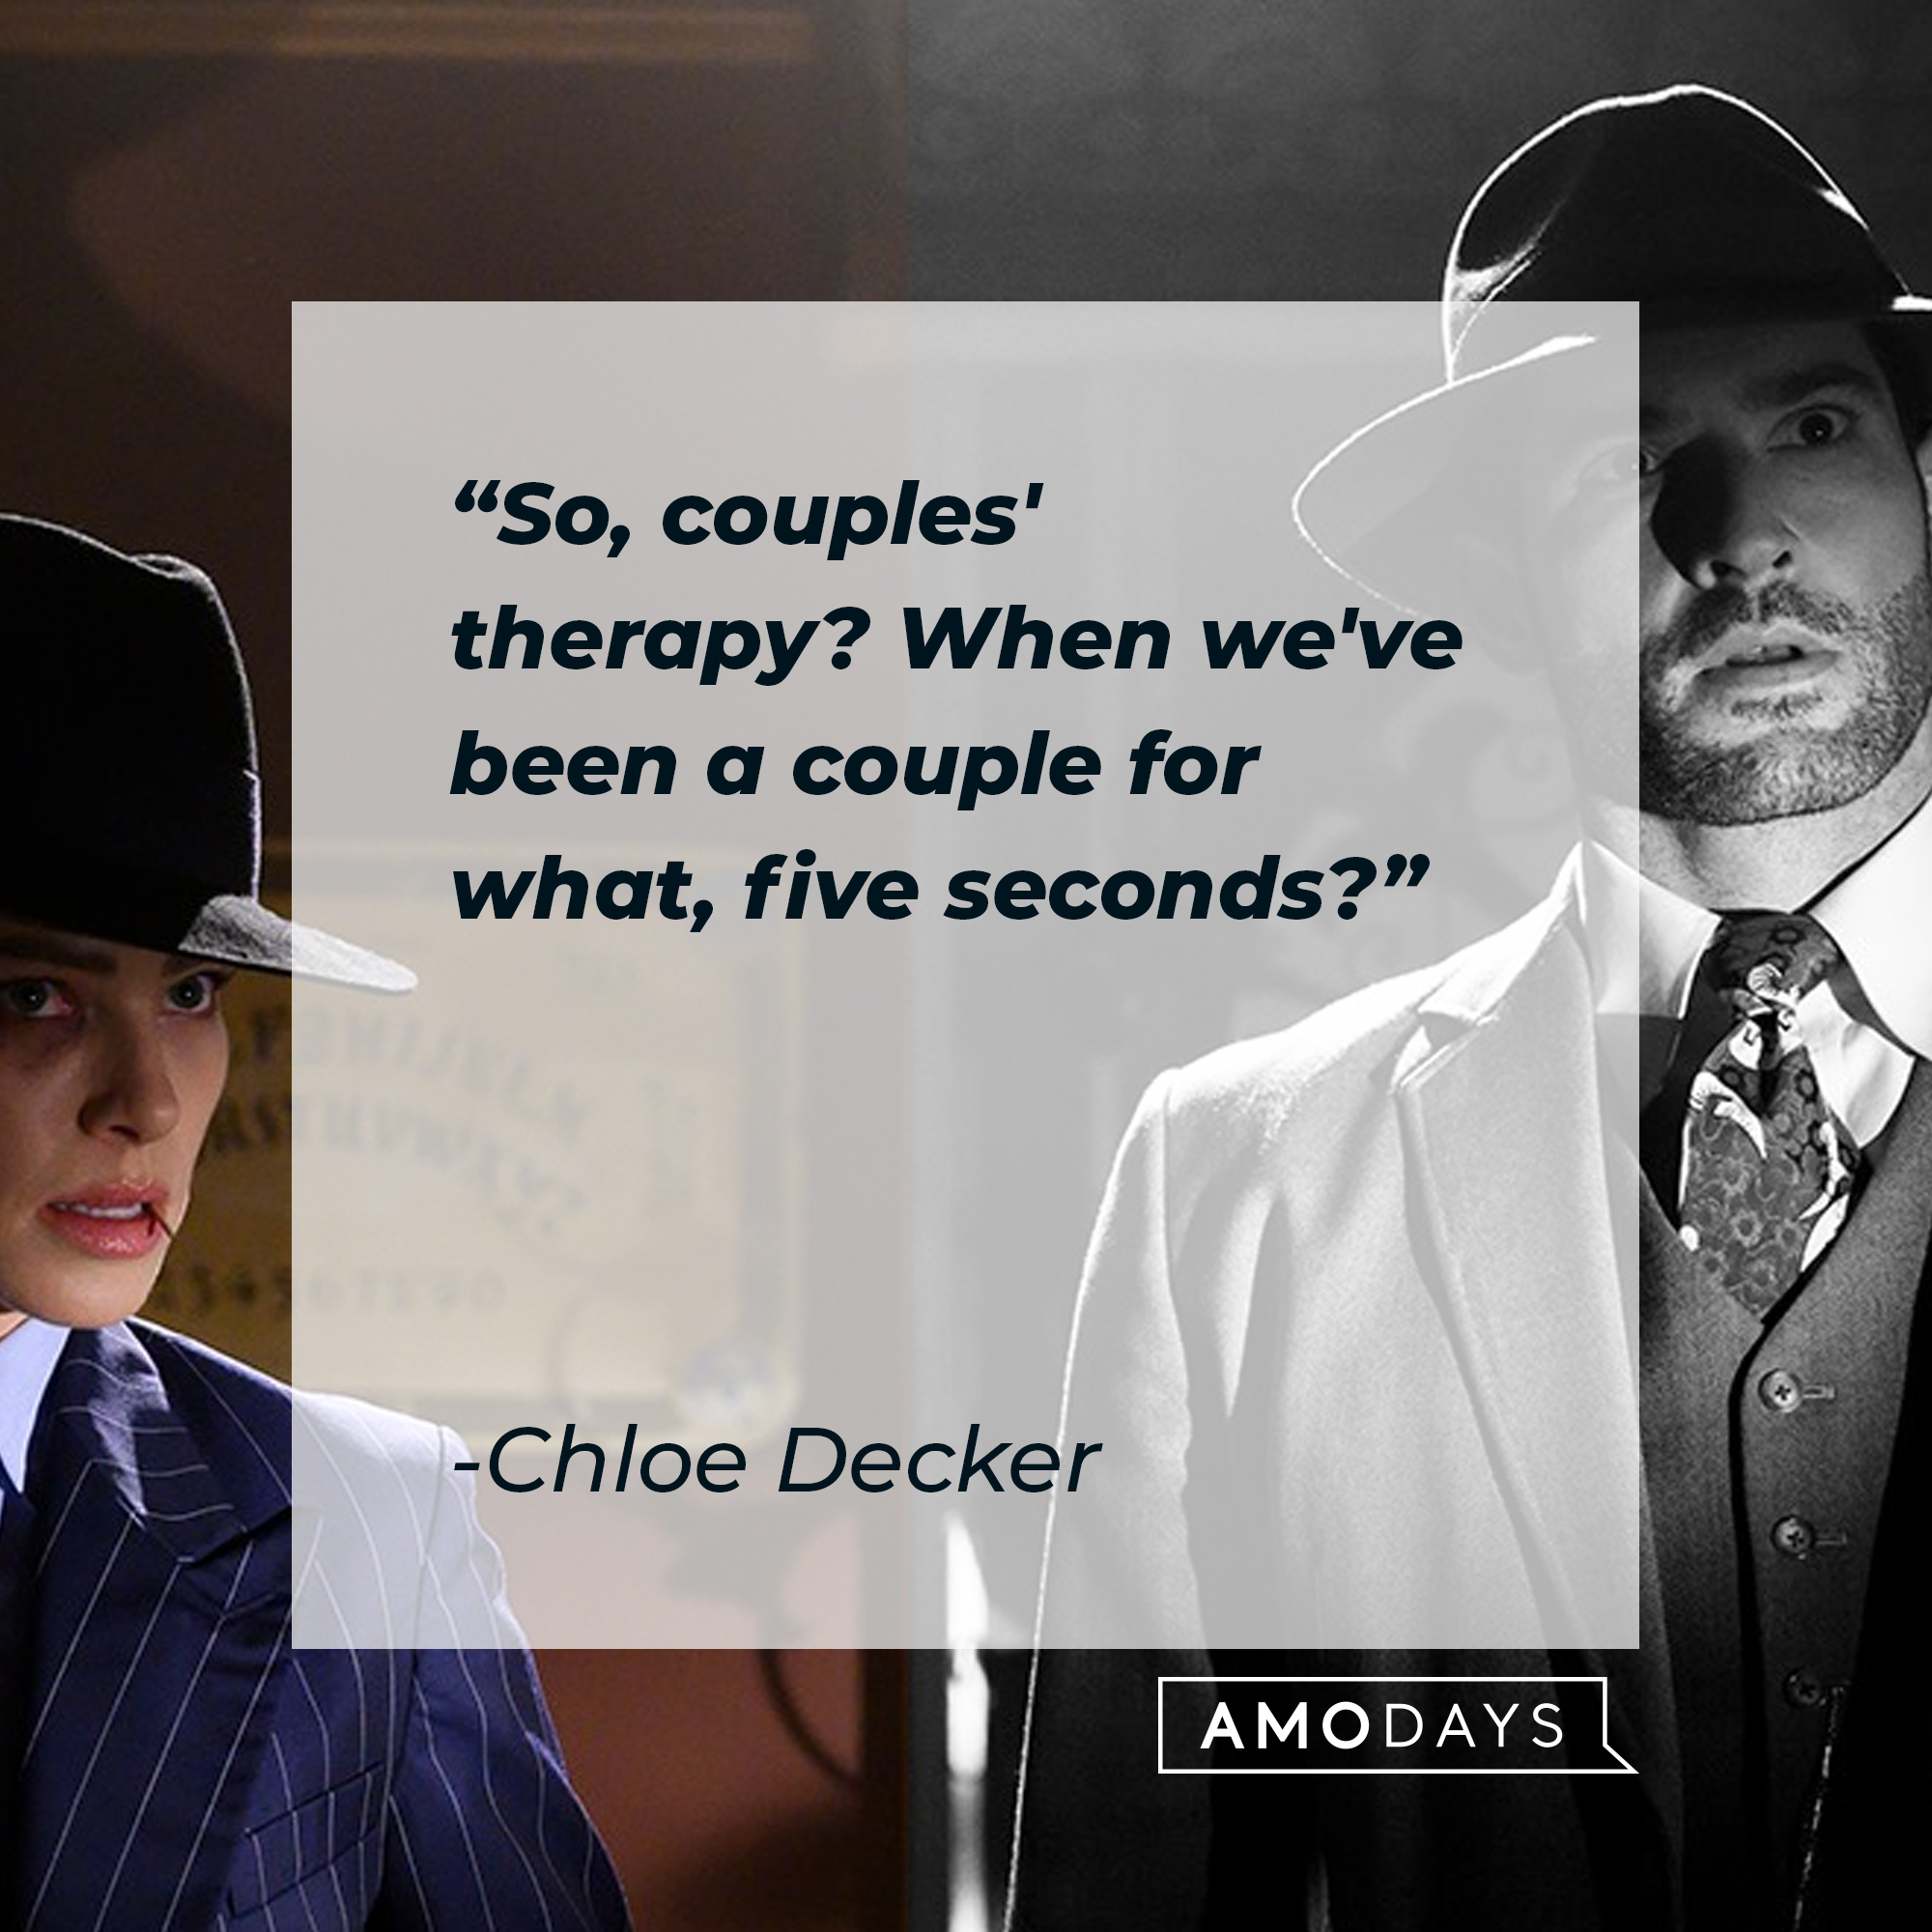 Chloe Decker’s quote: "So, couples' therapy? When we've been a couple for what, five seconds?" | Source: Facebook.com/LuciferNetflix